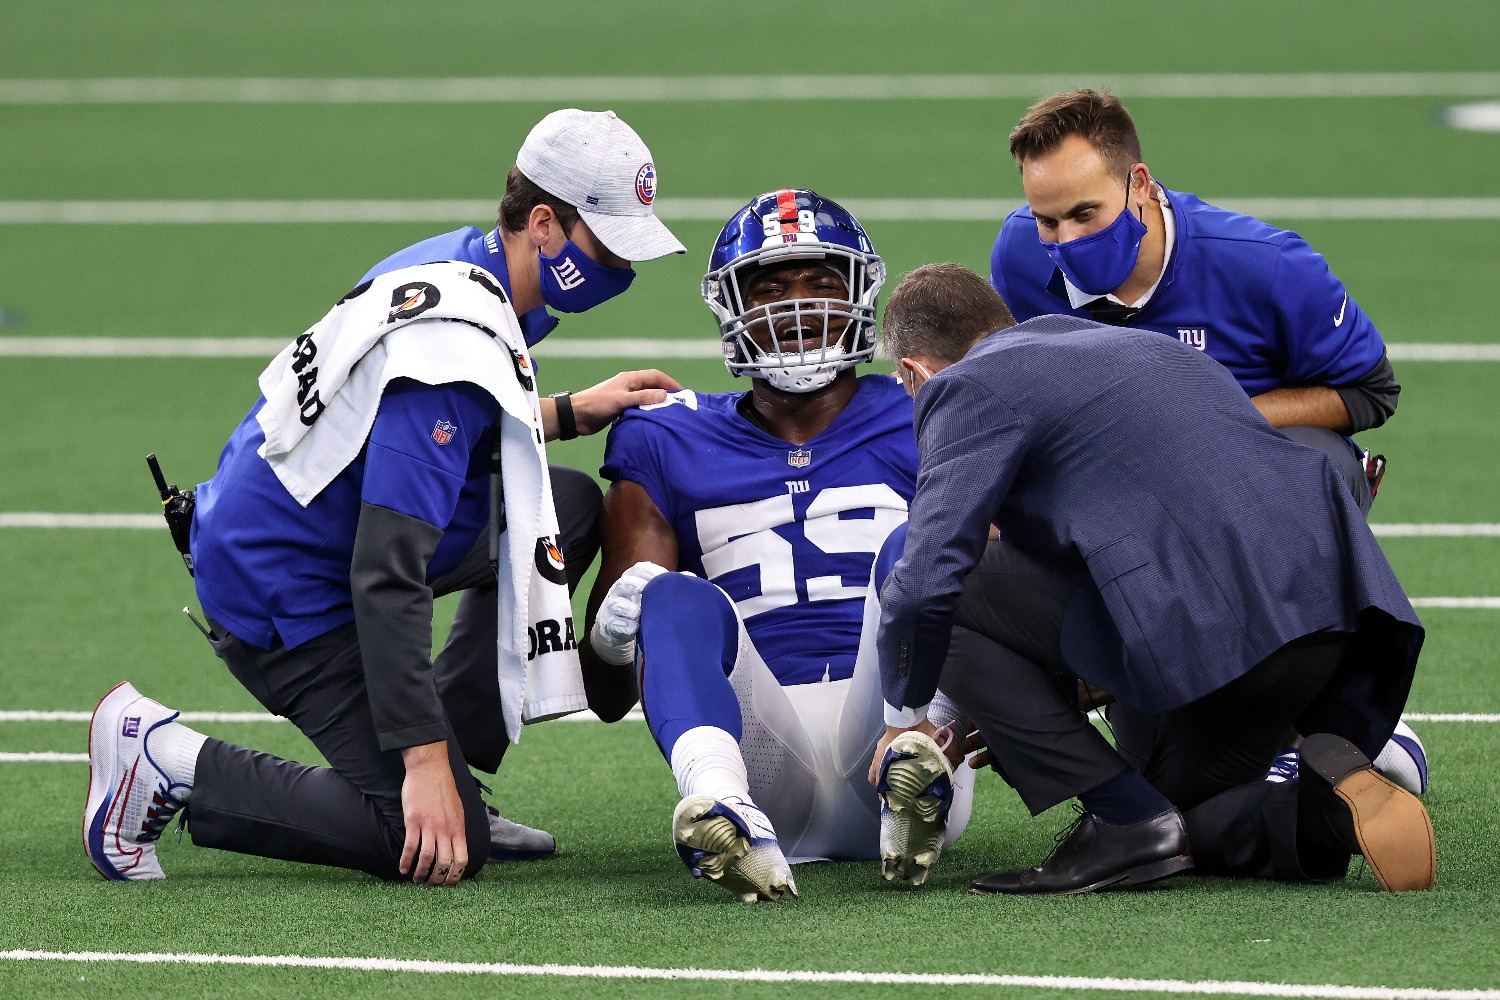 The New York Giants just rising star linebacker Lorenzo Carter to a season-ending injury in Sunday's loss to the Dallas Cowboys.